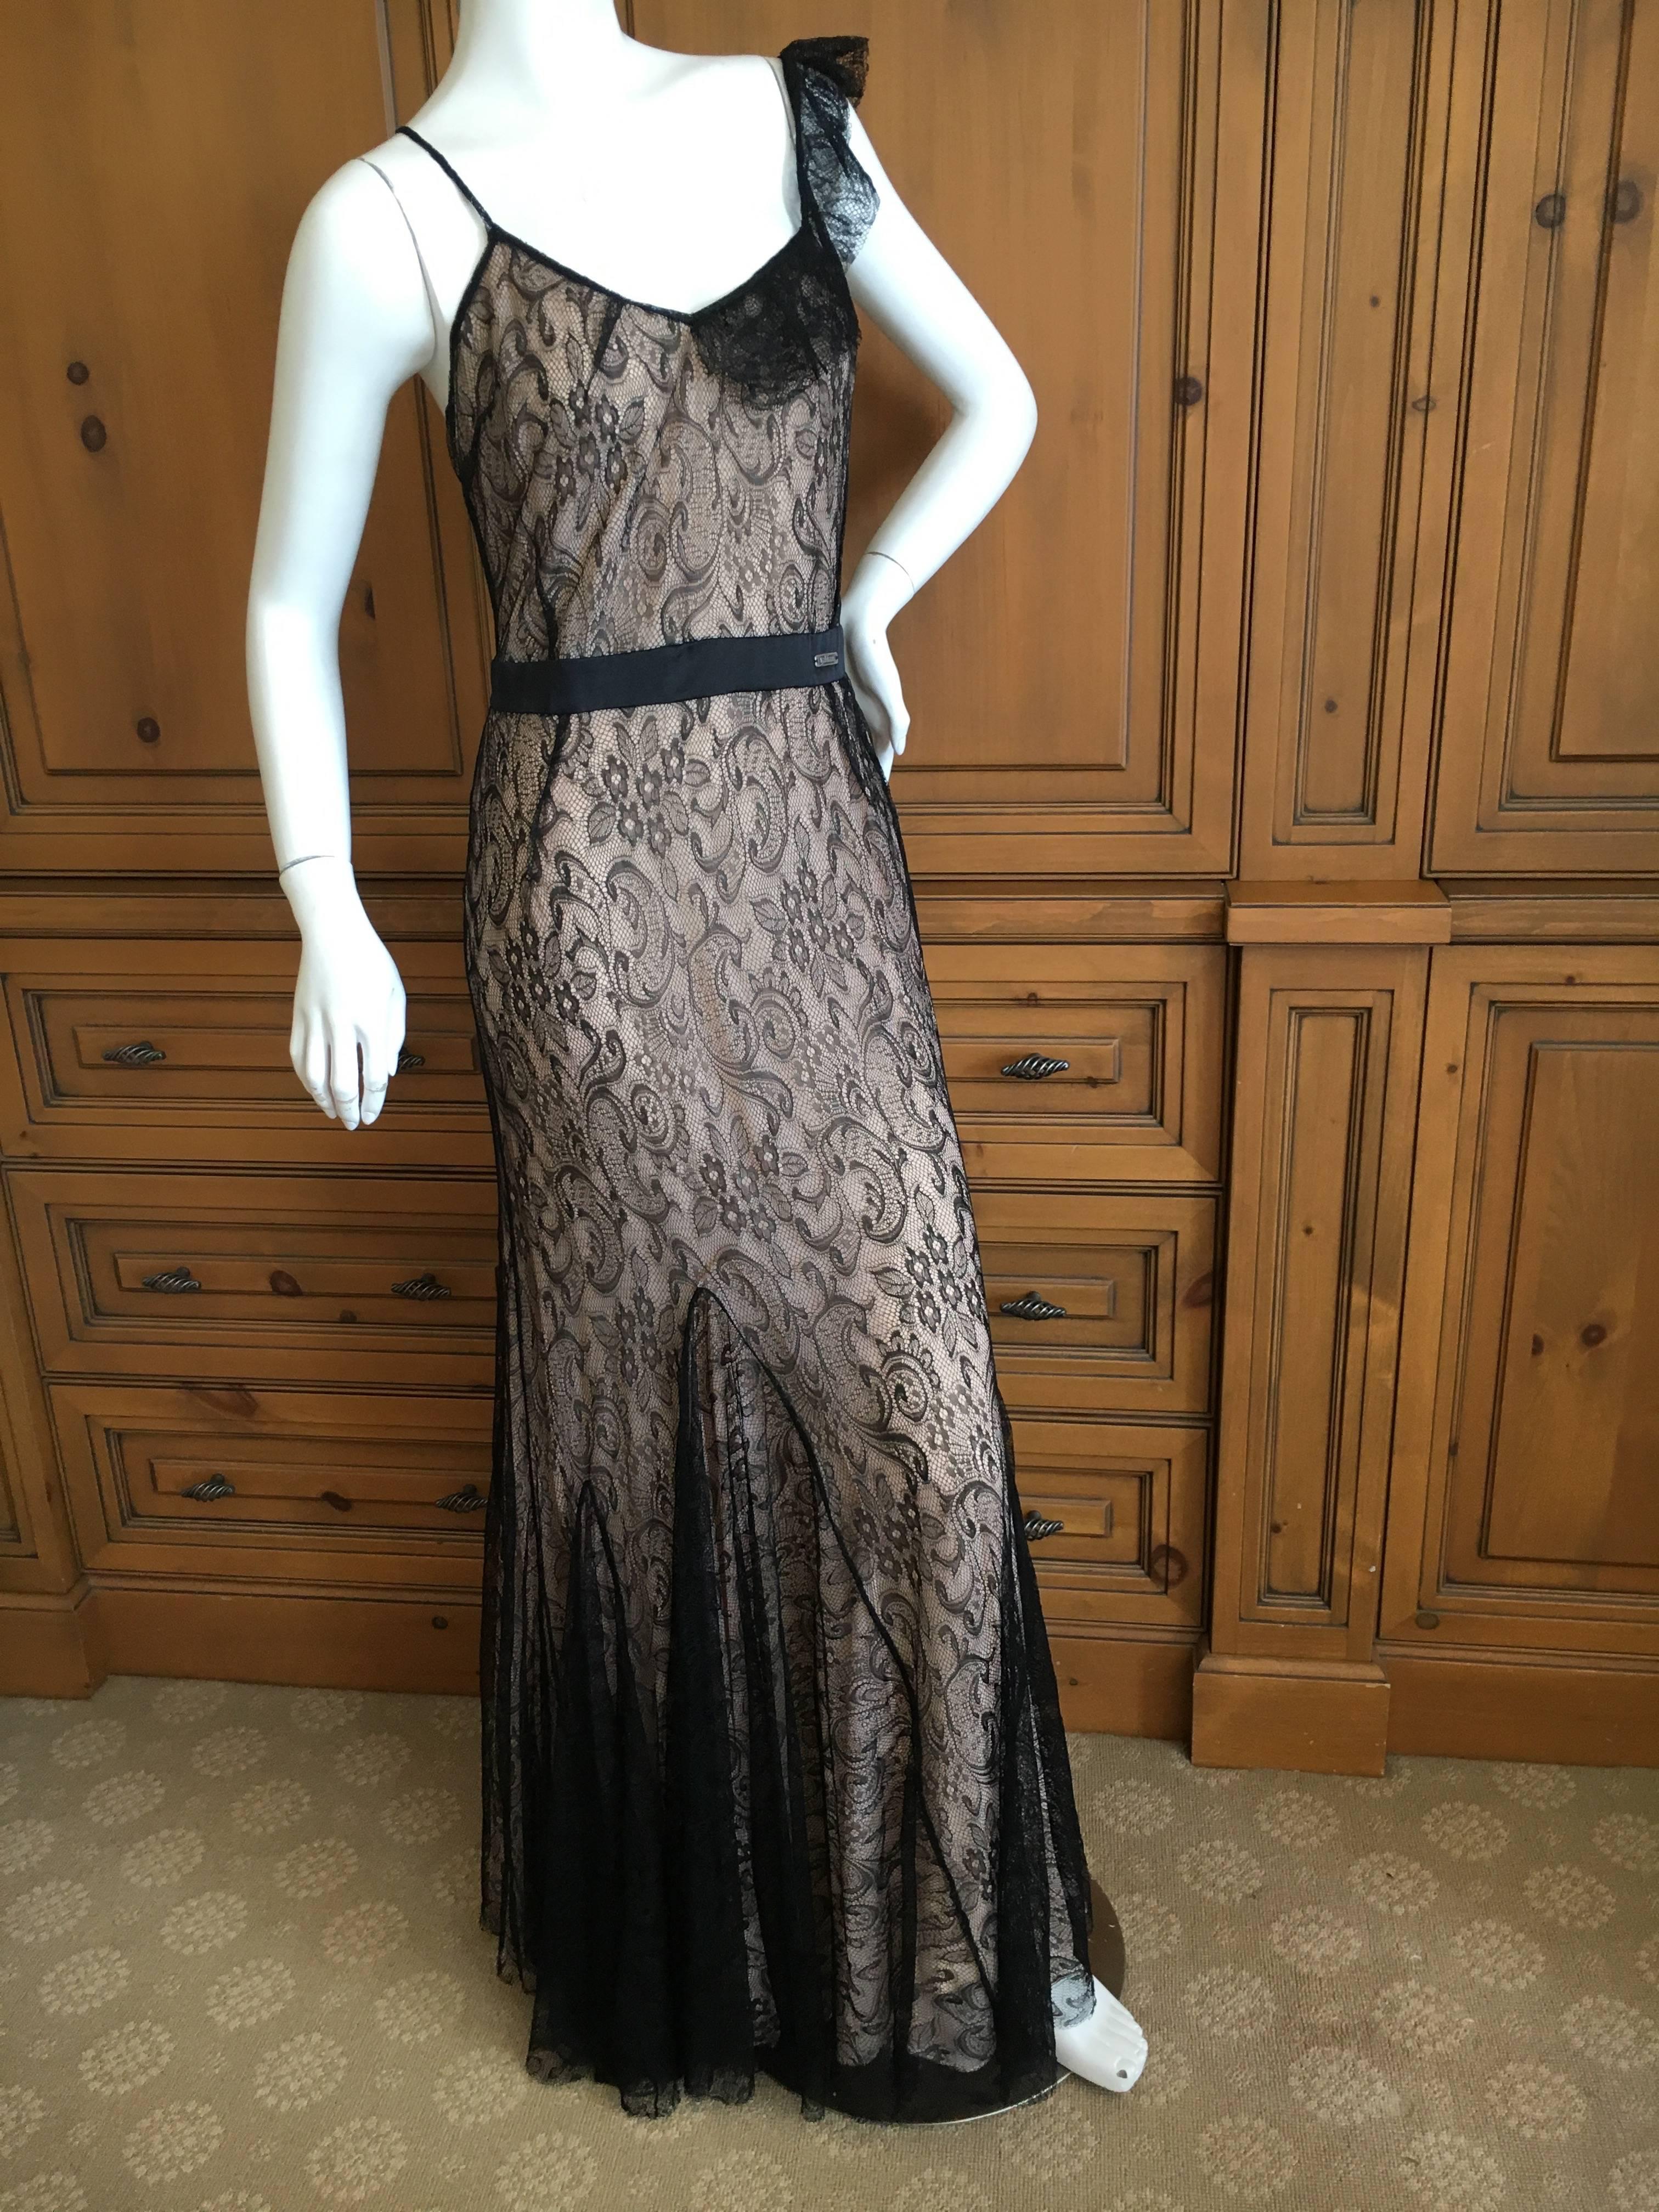 Women's John Galliano Black Lace Evening Dress with Pale Pink Lining For Sale